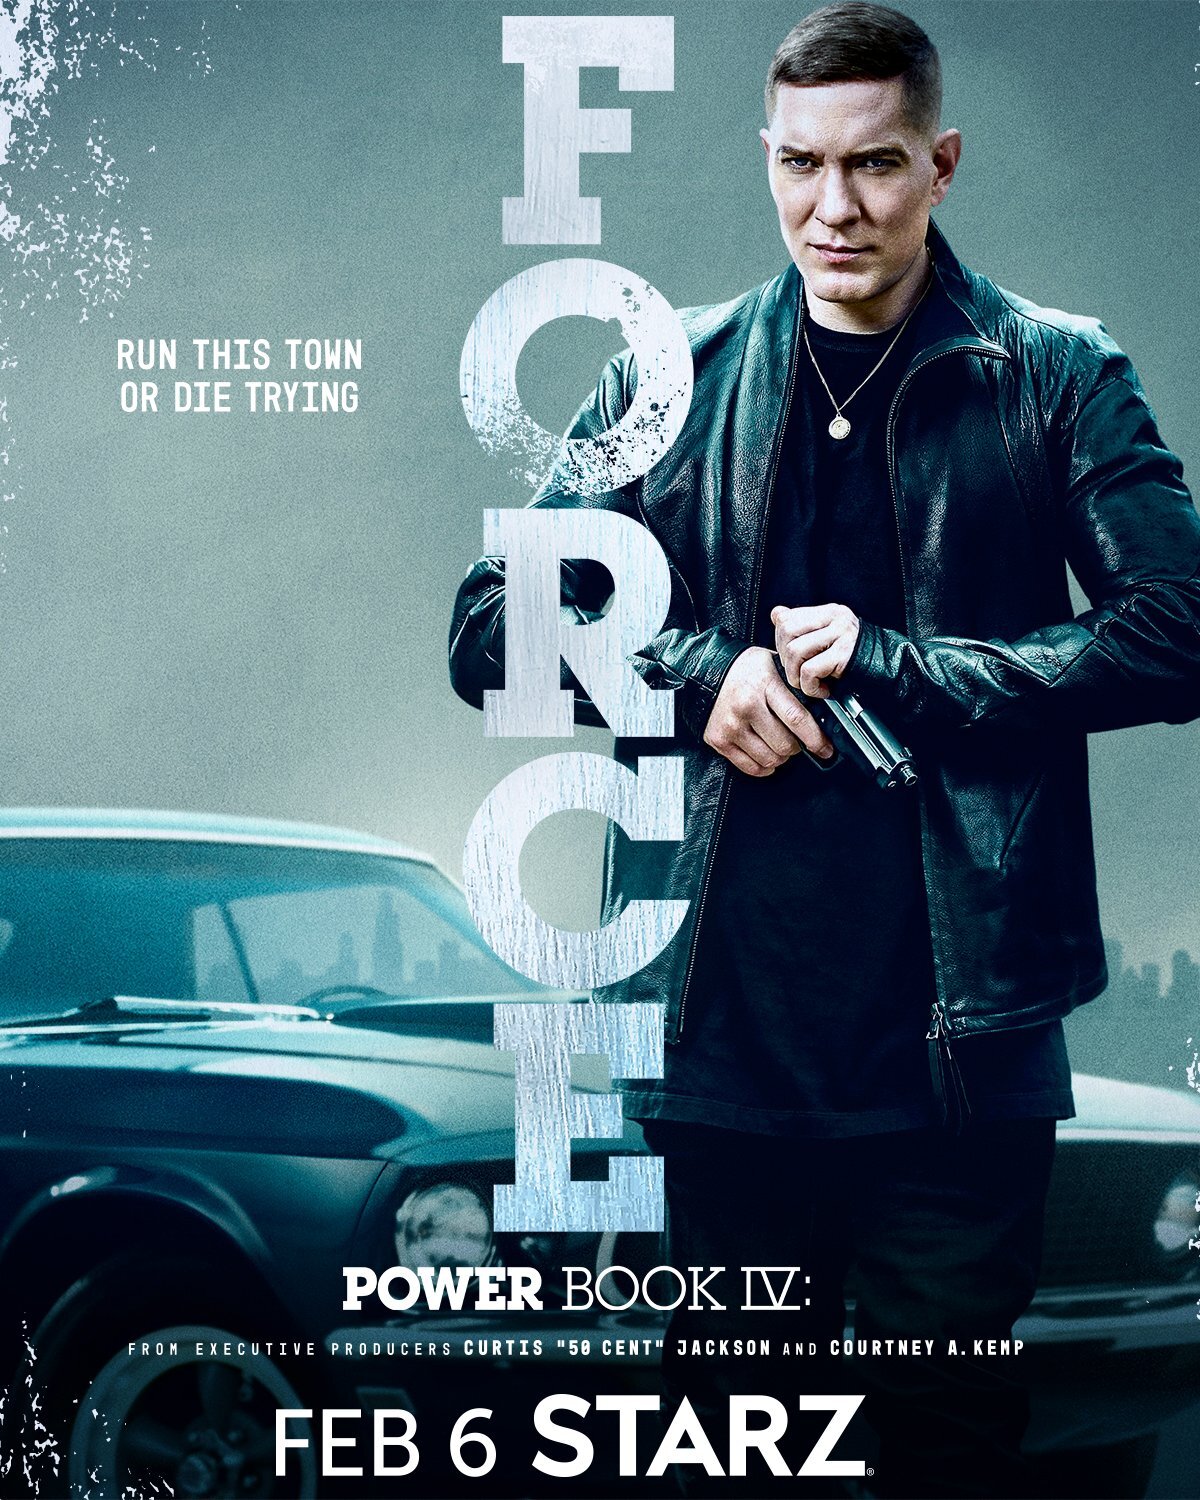 New Clip From Starz Original Series 'Power Book IV: Force' - Season 1, Episode 10